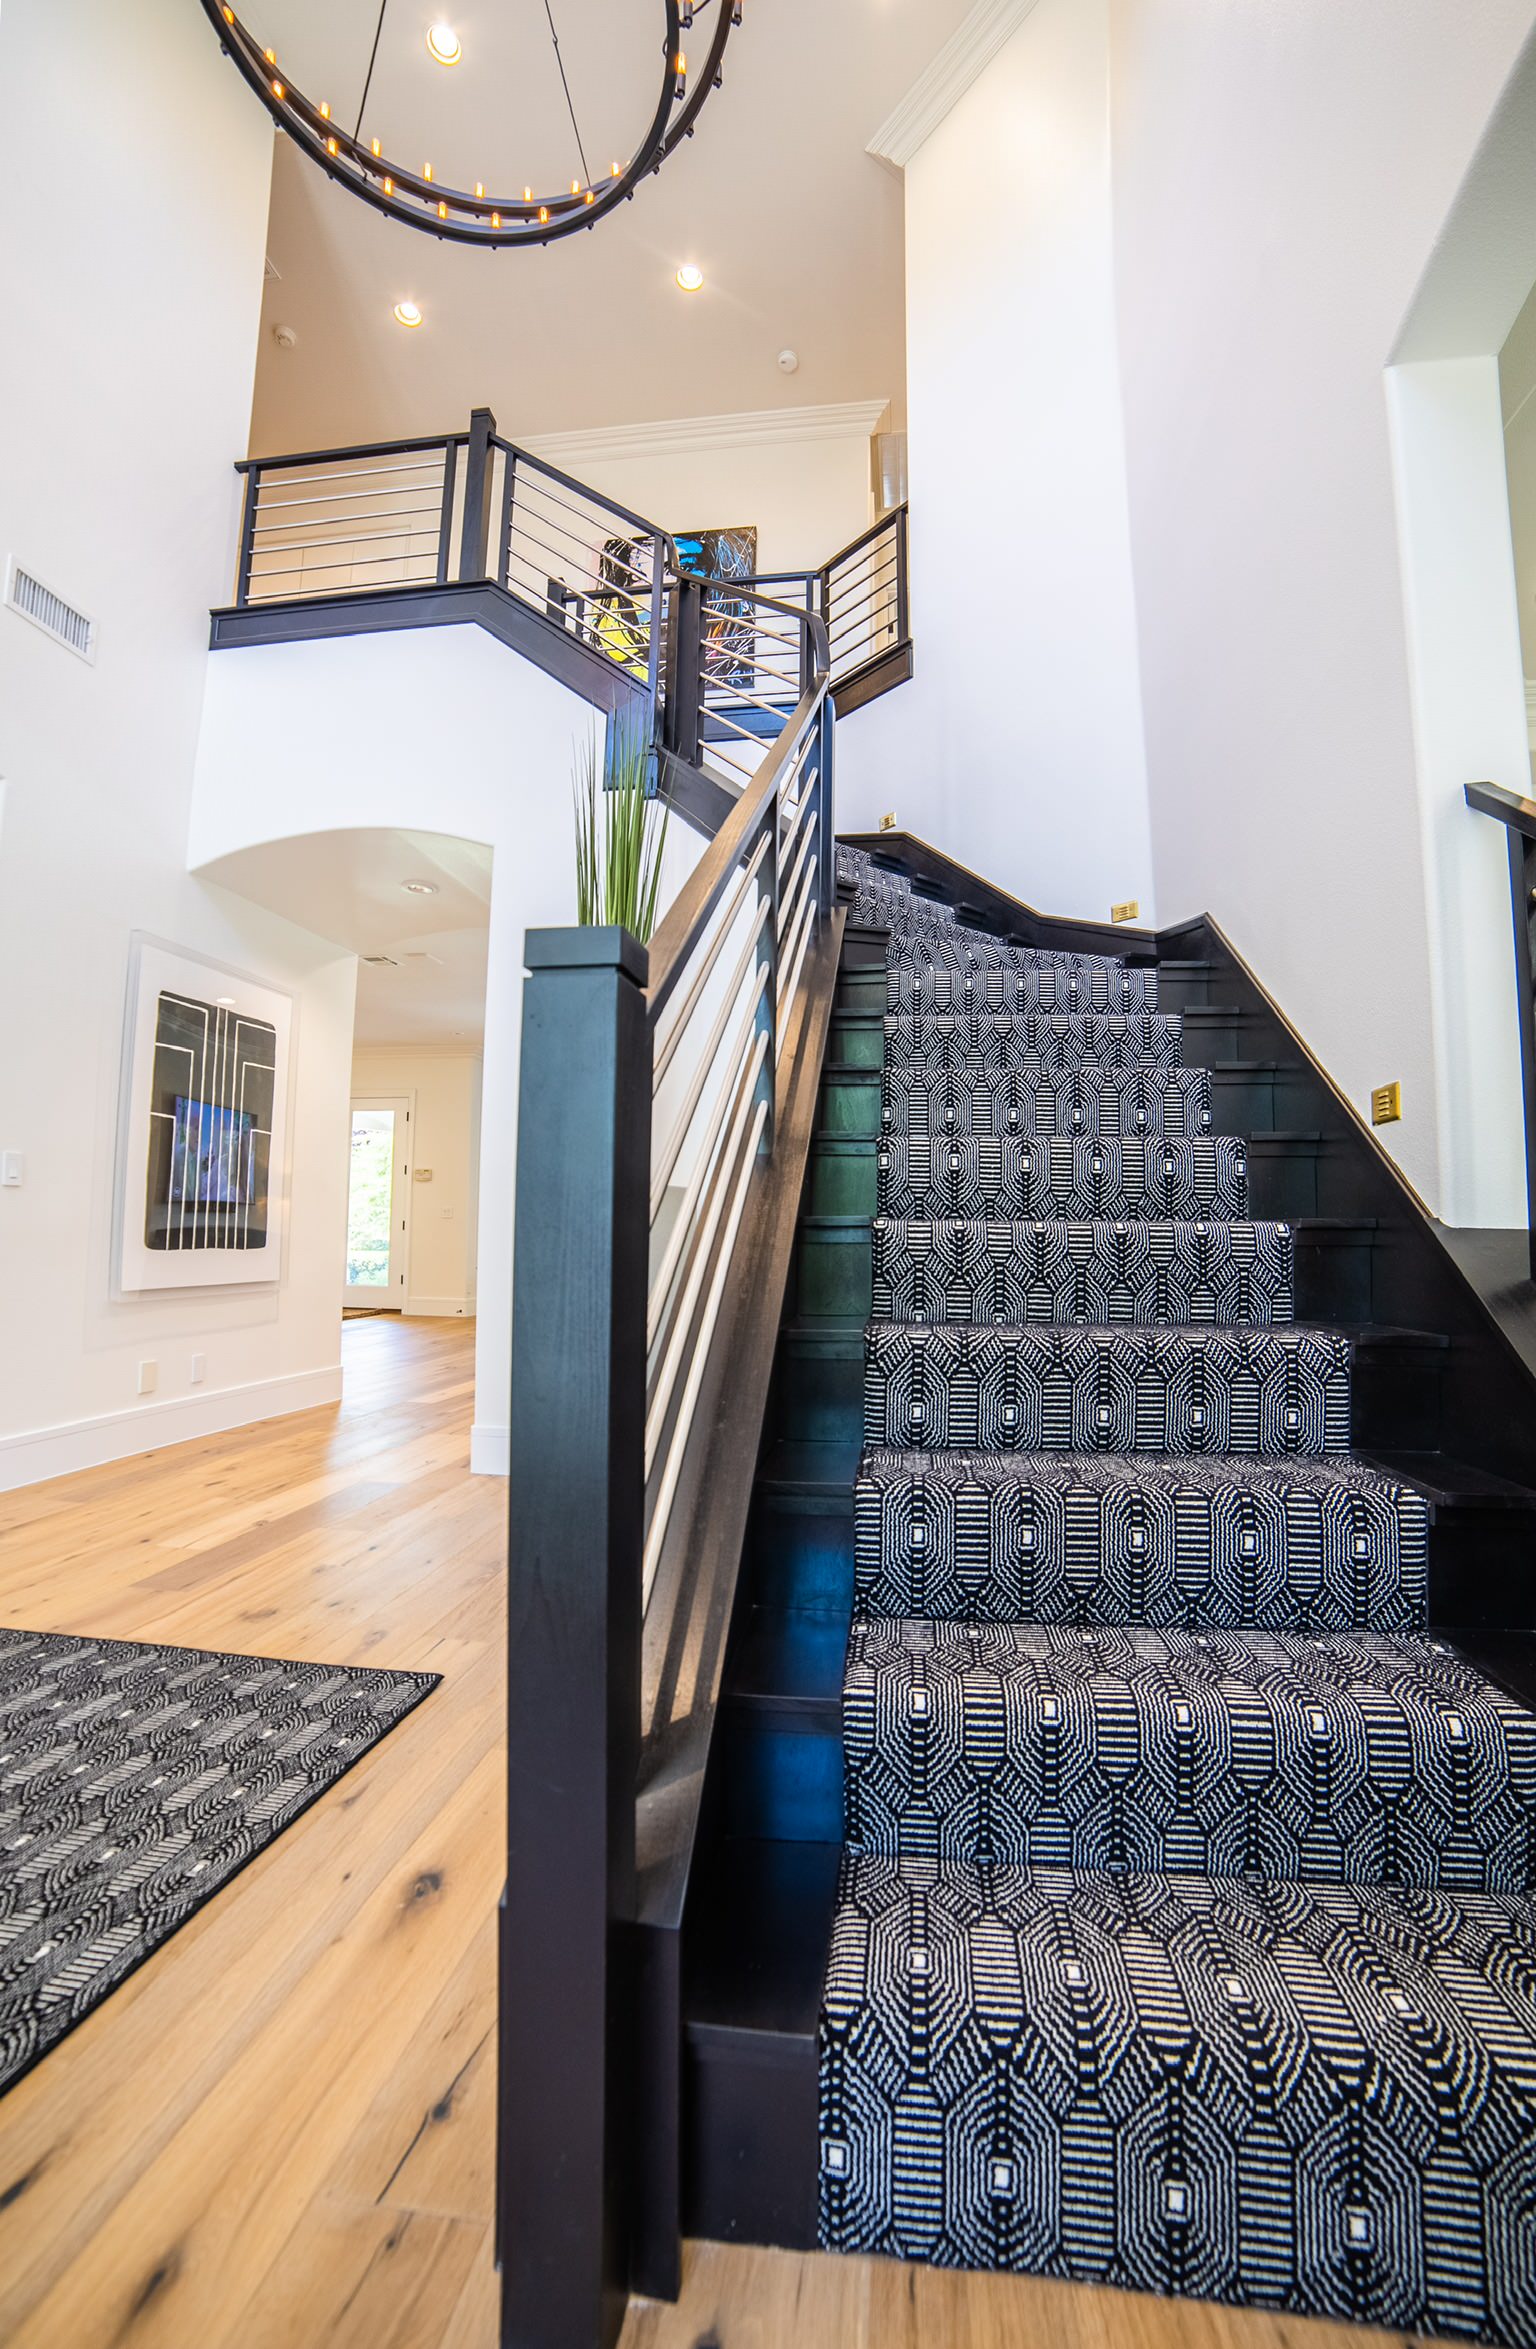 This black steel staircase makes for the perfect entry to this home!